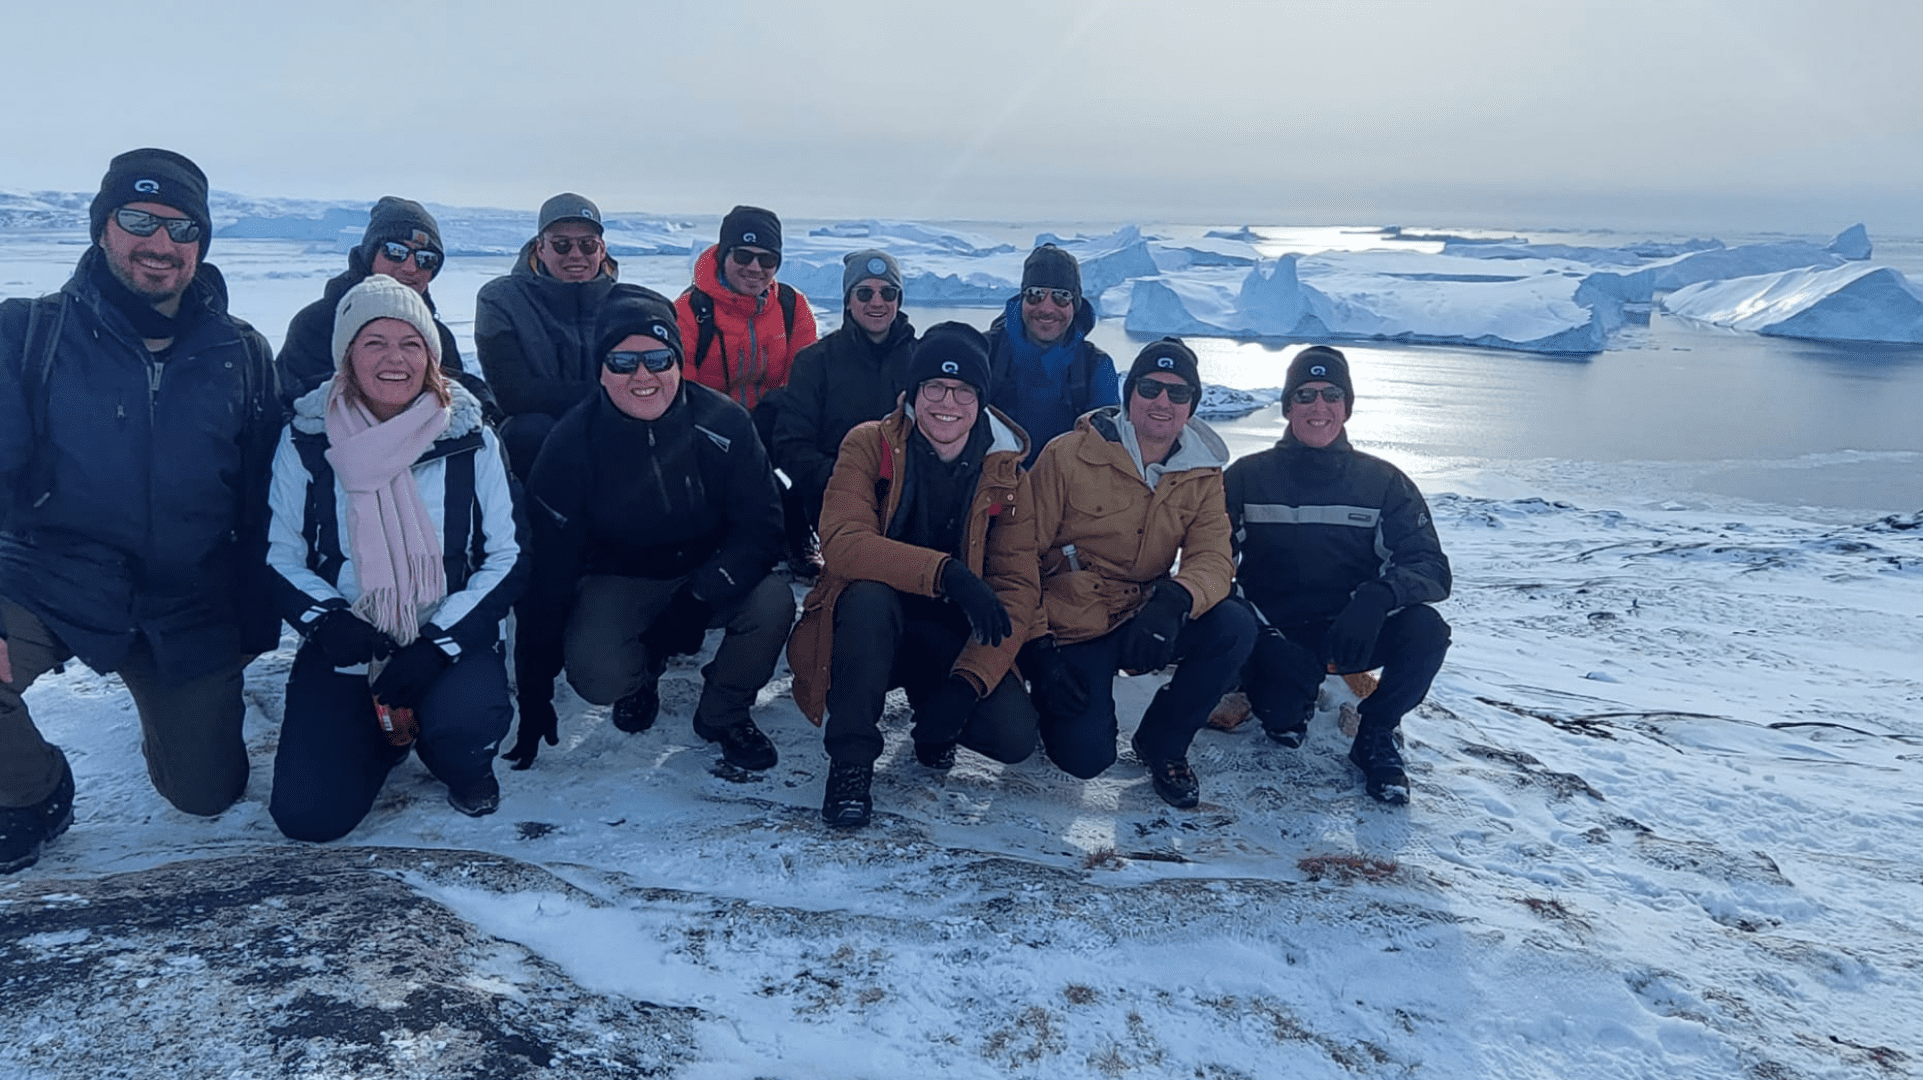 Group of people from the QCIFY team squatting down for group photo in arctic with snow and water